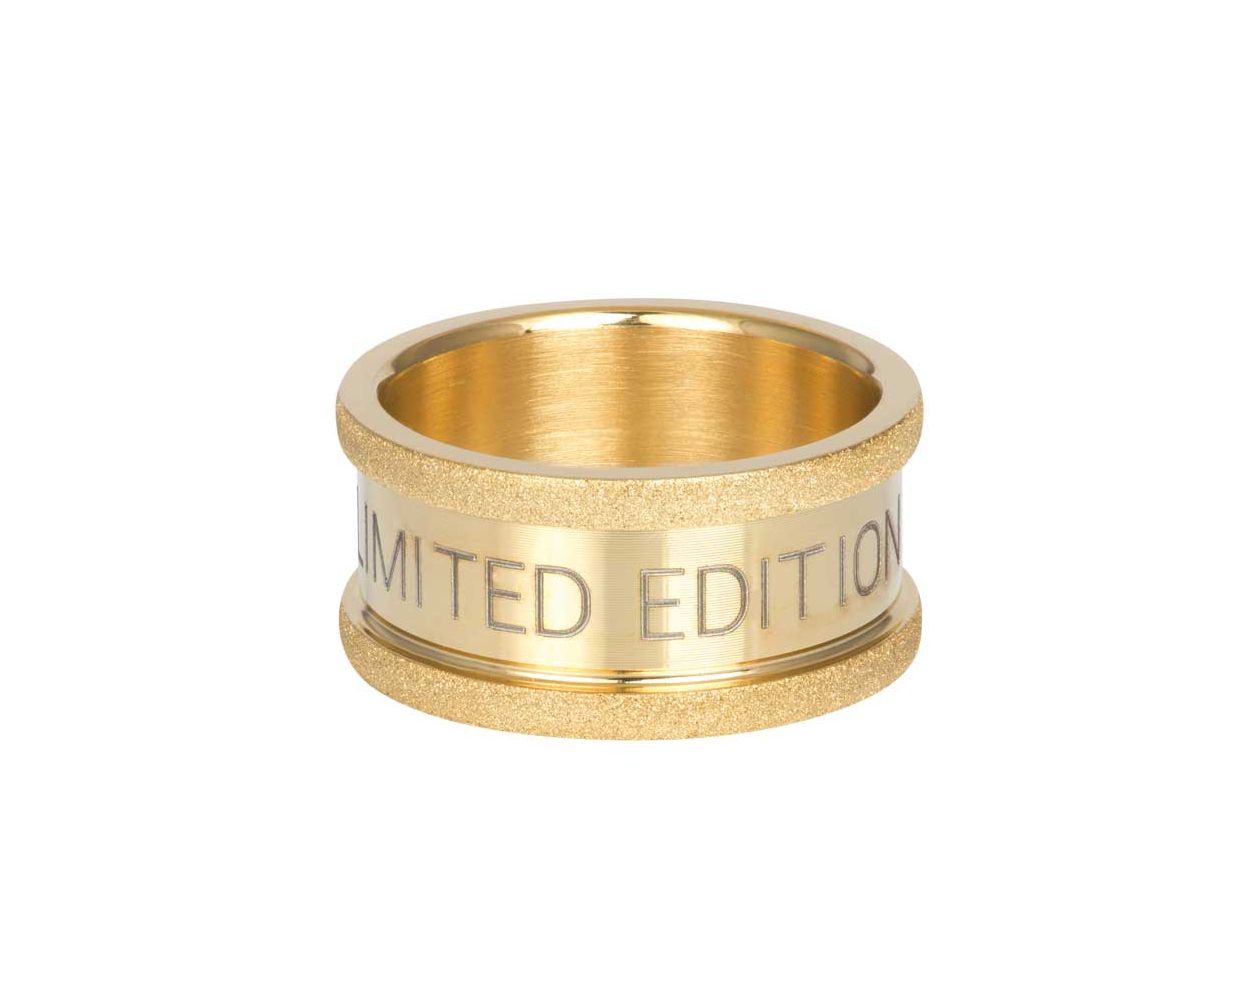 iXXXi Basis Ring 10 mm Sandblasted Gold Color - R07901